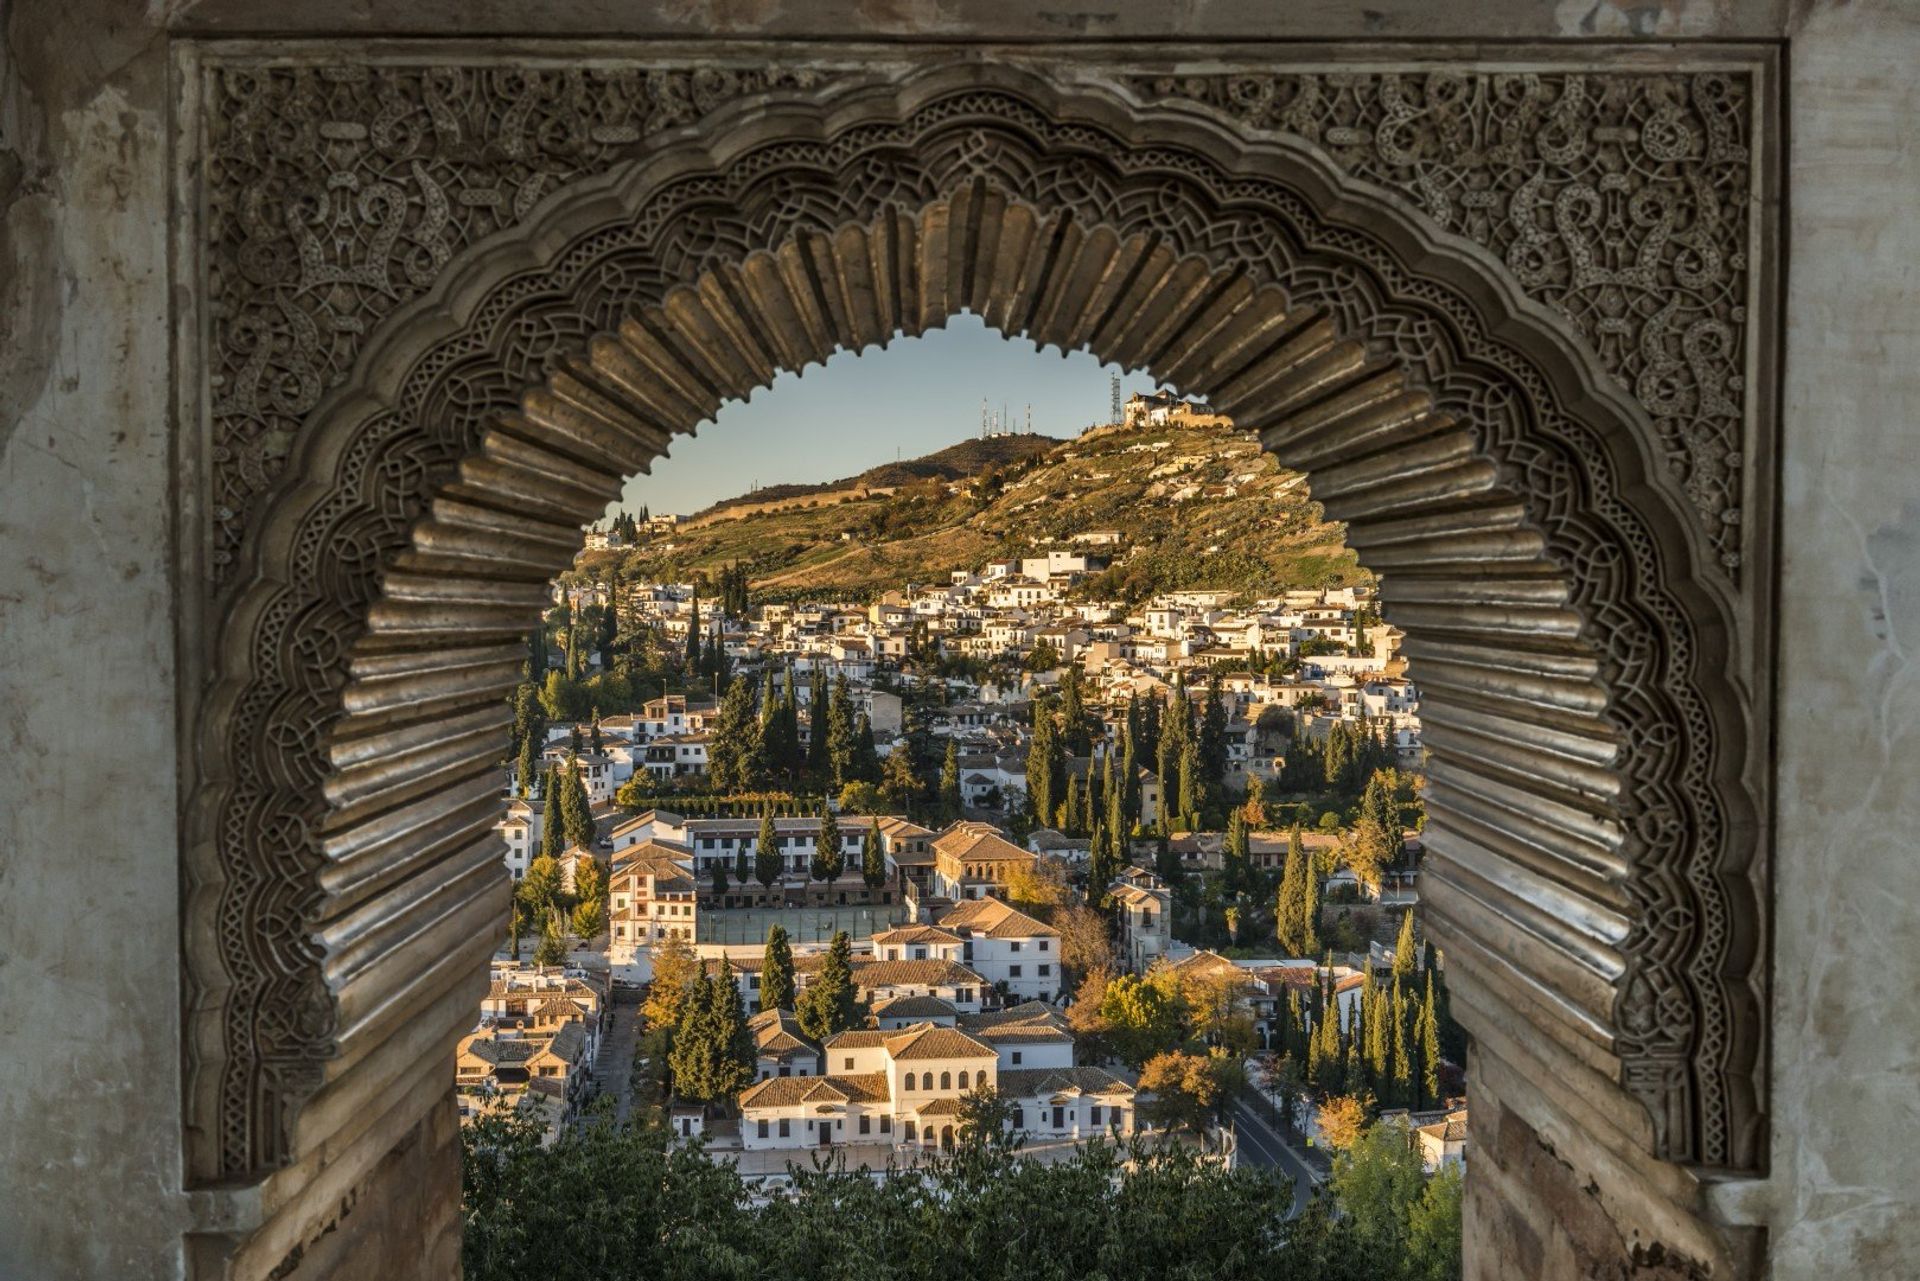 View of Granada from Alhambra Palace